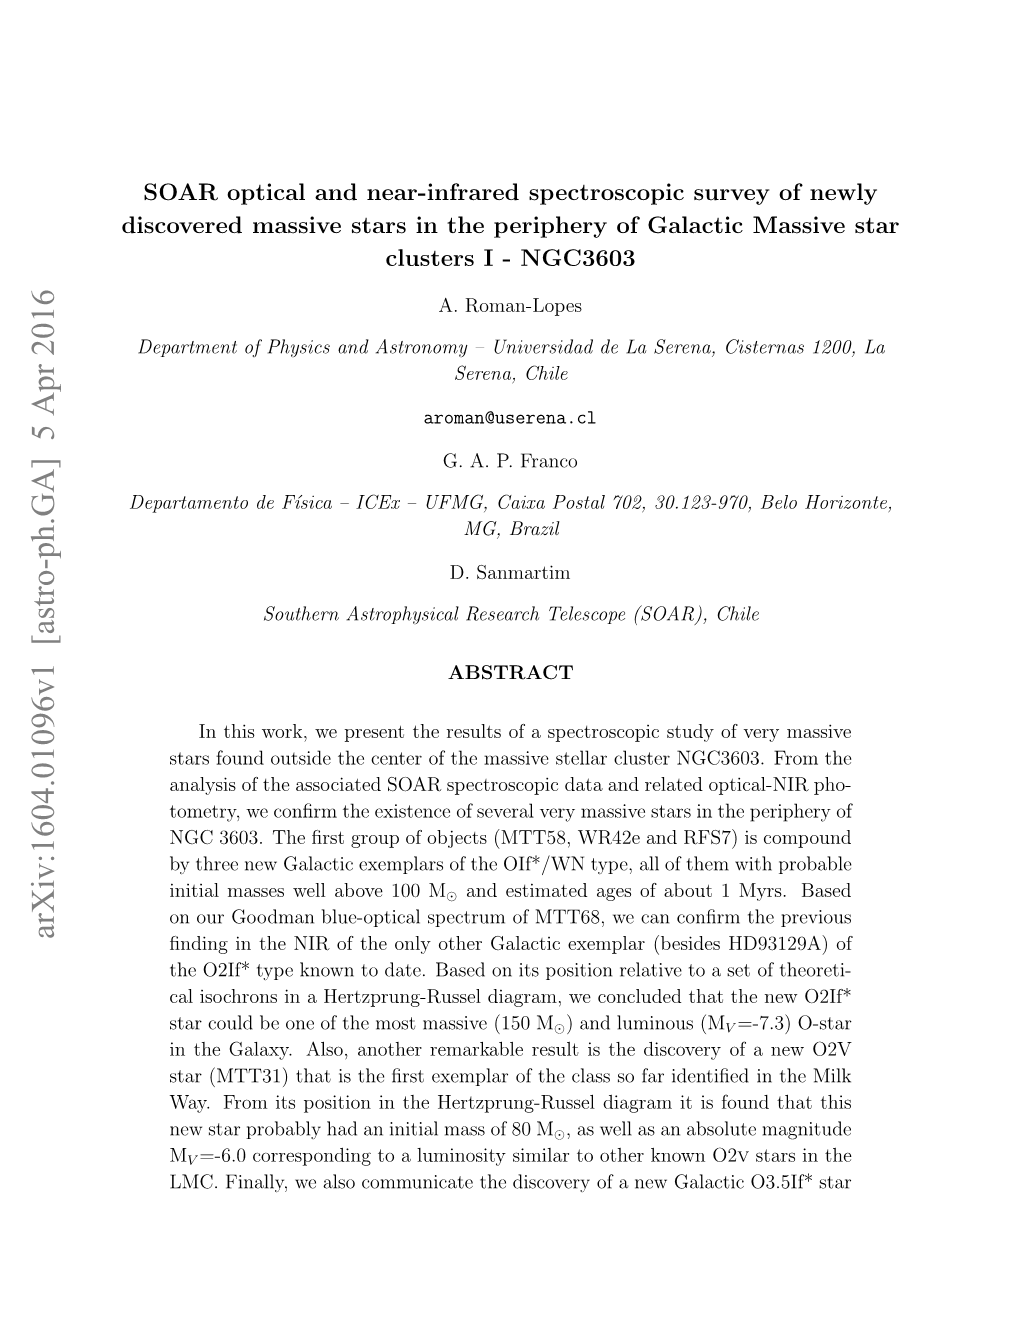 SOAR Optical and Near-Infrared Spectroscopic Survey of Newly